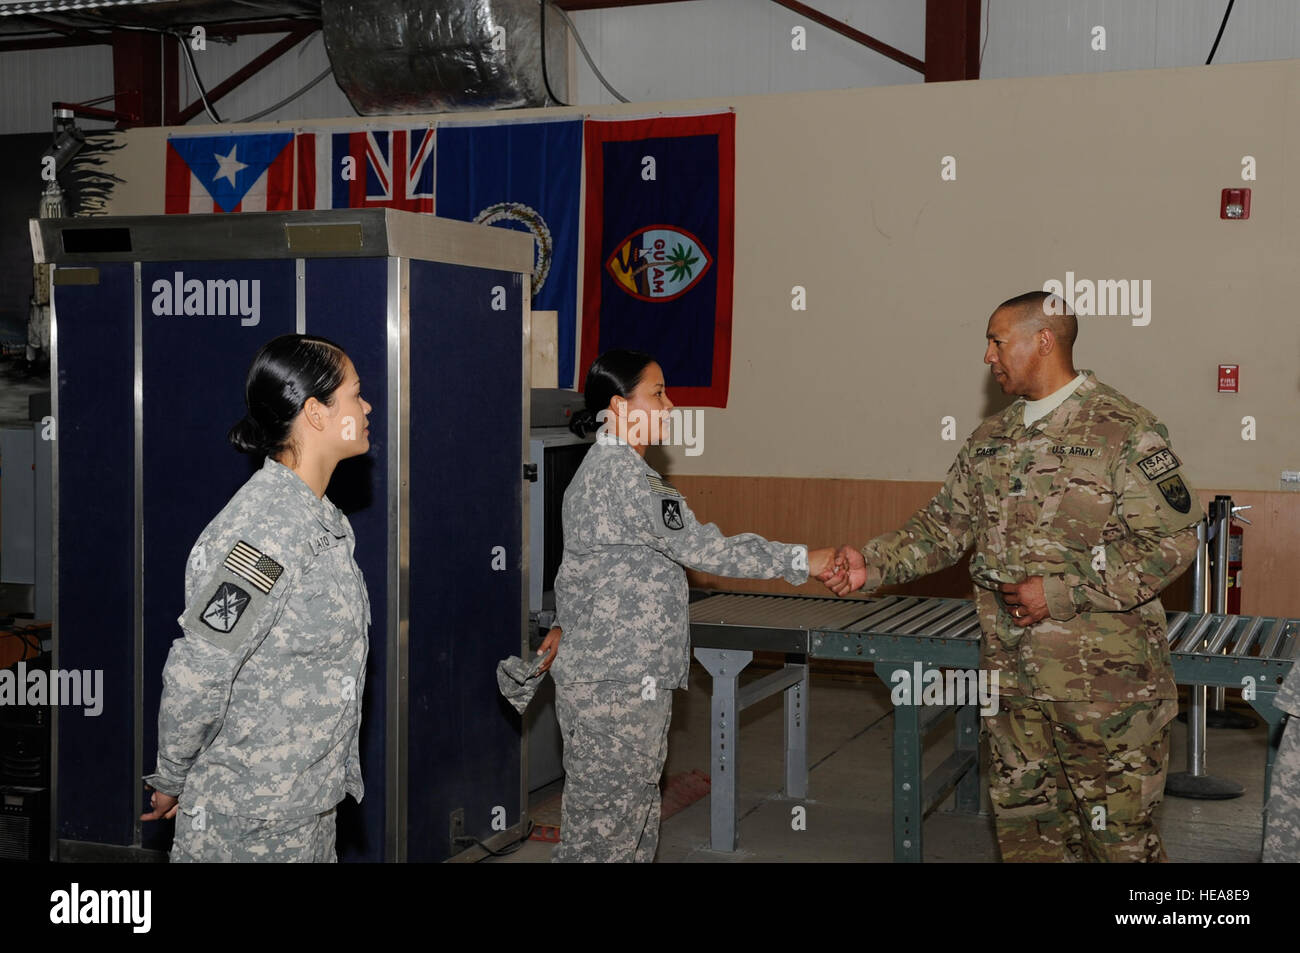 Army Command Sgt. Maj. Thomas Capel, International Security Assistance Force and United States Forces - Afghanistan senior enlisted adviser presents a superior performer coin to Spc. Kellie Mantanona during a tour of the Transit Center at Manas, Kyrgyzstan, Aug. 1, 2012. Mantanona serves as a customs agent at the Transit Center and is assigned to the 368th Military Police Company, Detachment 4. She is currently deployed from the U.S. Army Reserve Center, Barrigada, Guam. Stock Photo